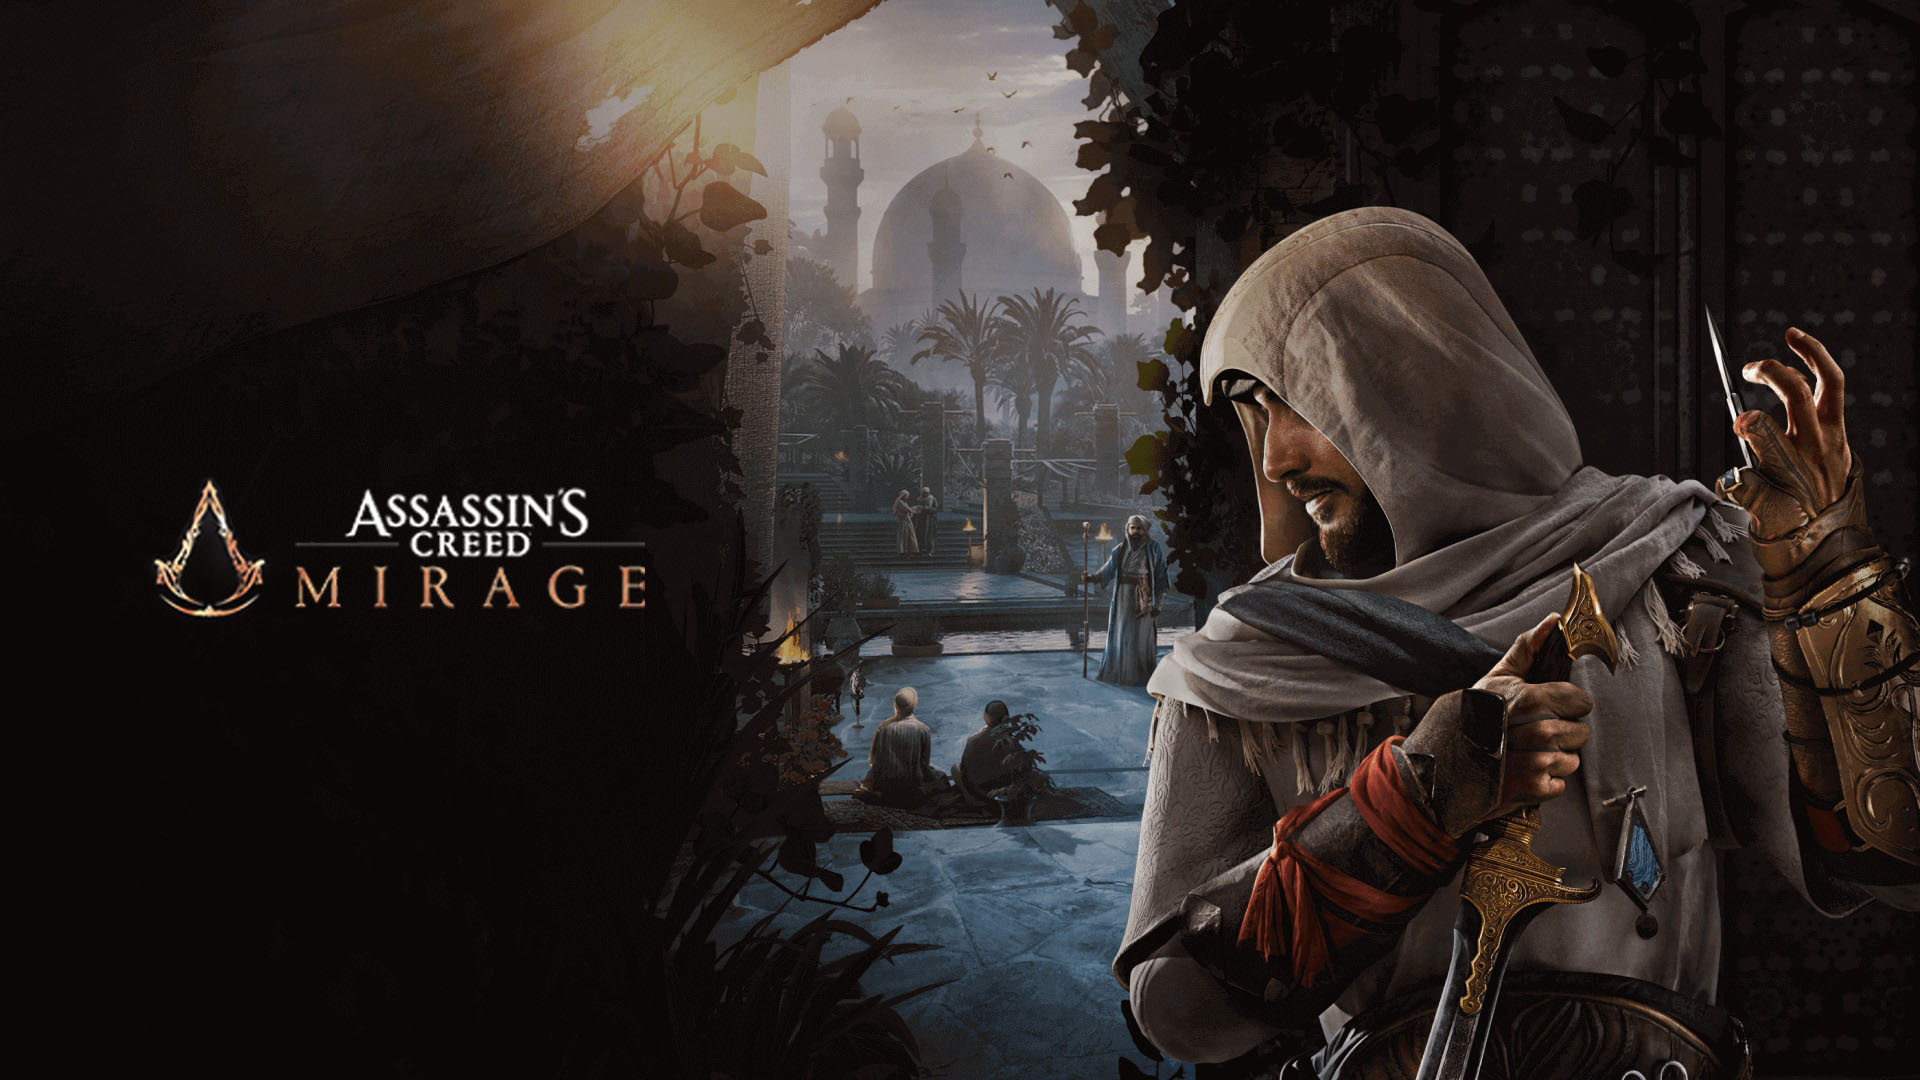 Assassin's Creed Mirage launches in debut trailer revealed